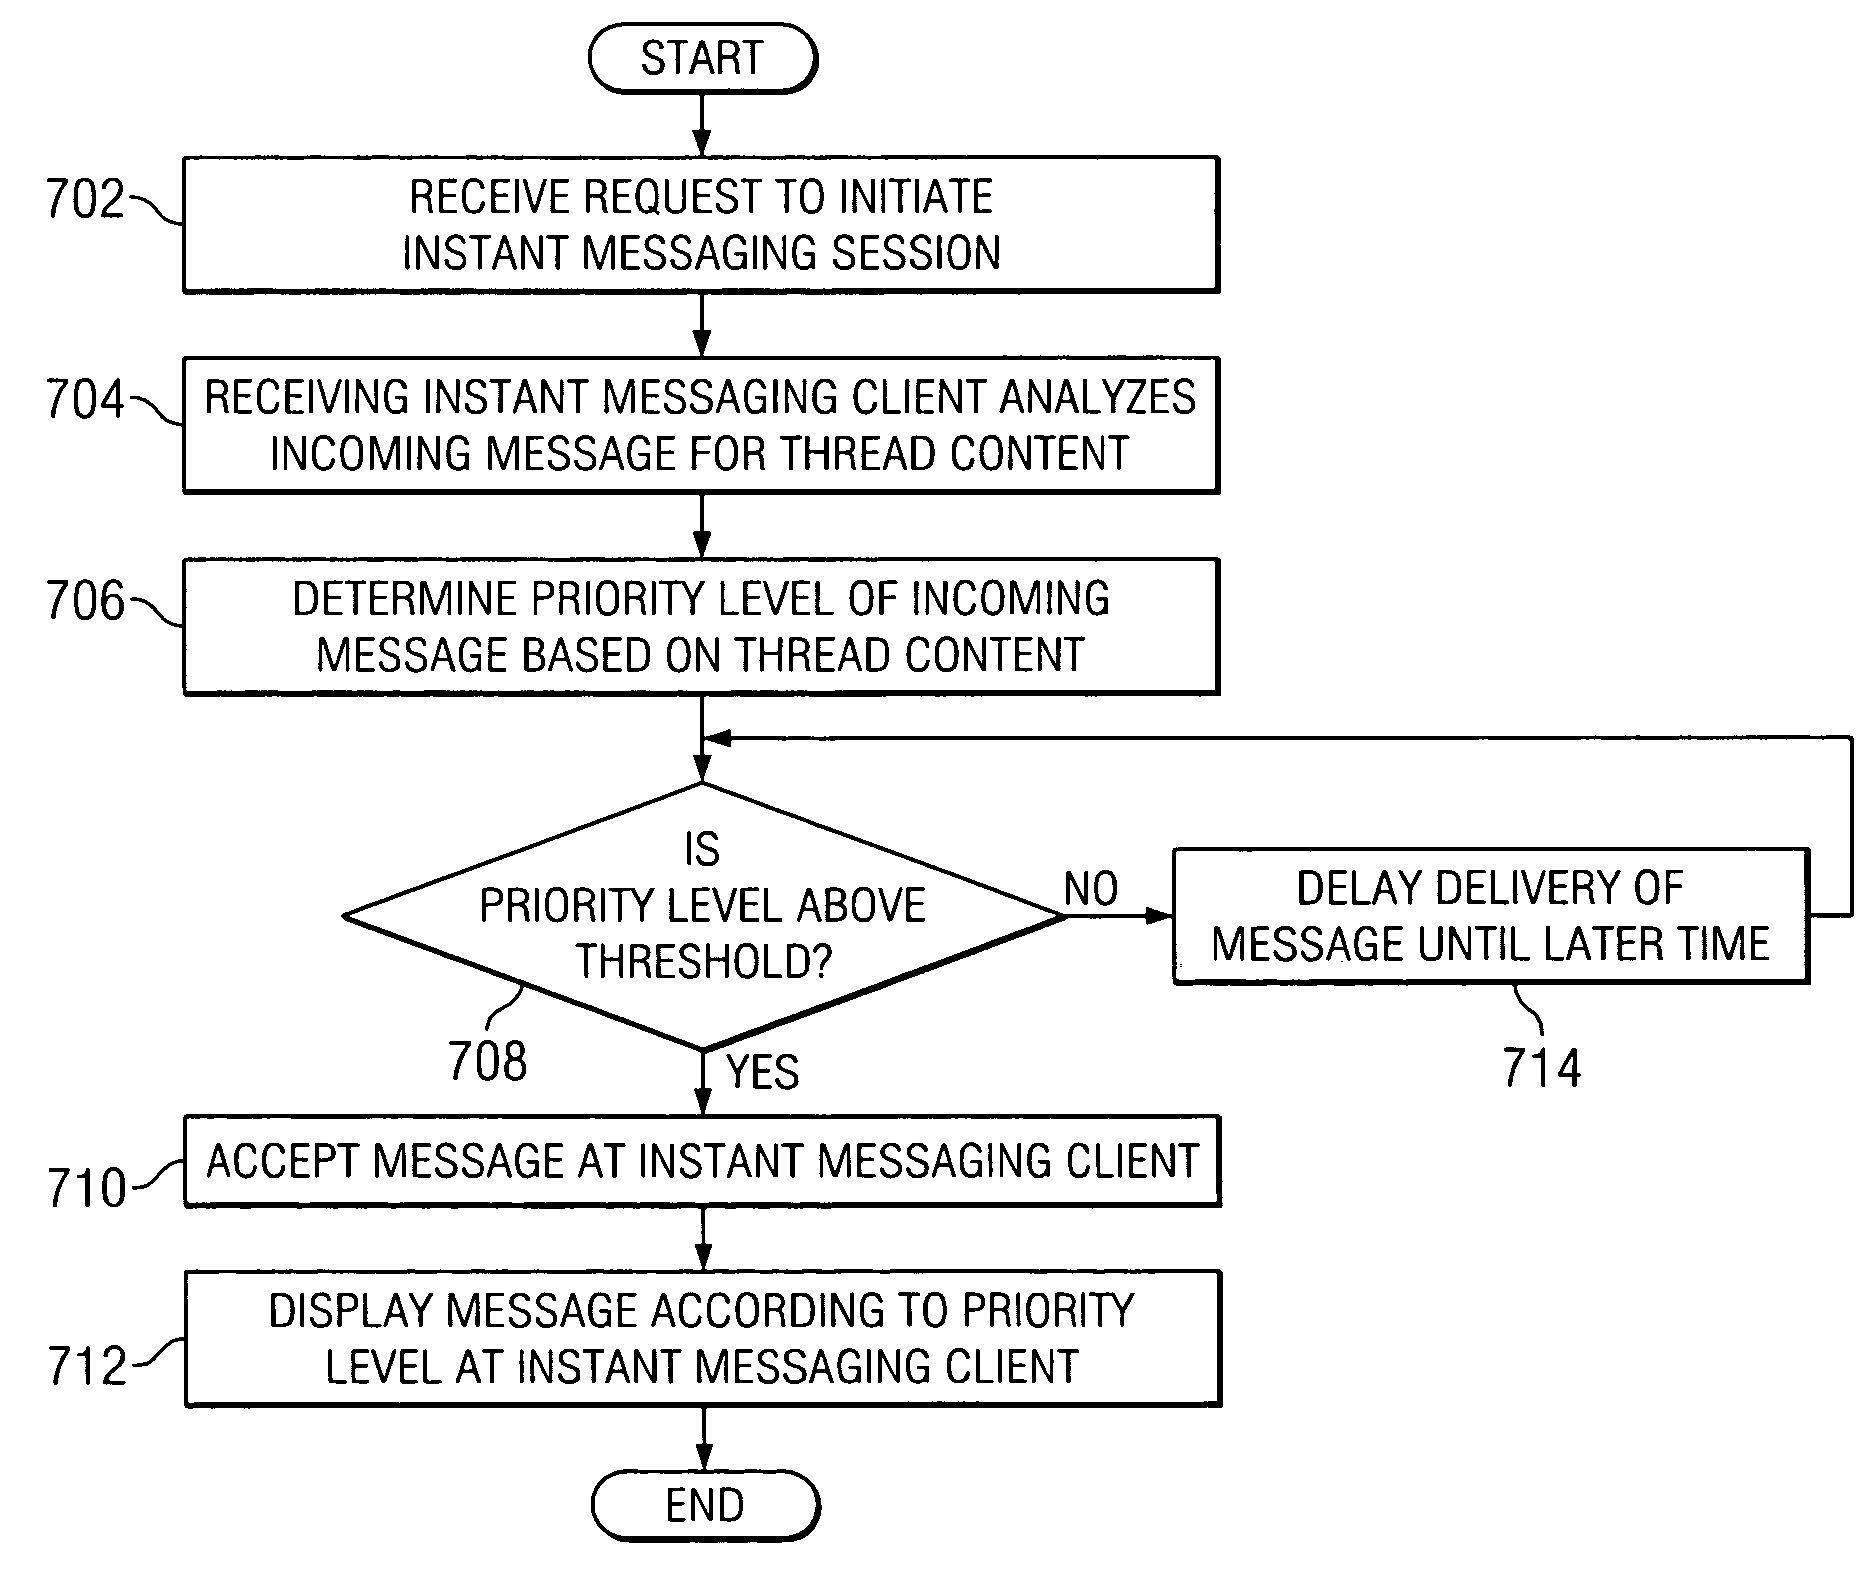 Instant messaging priority filtering based on content and hierarchical schemes